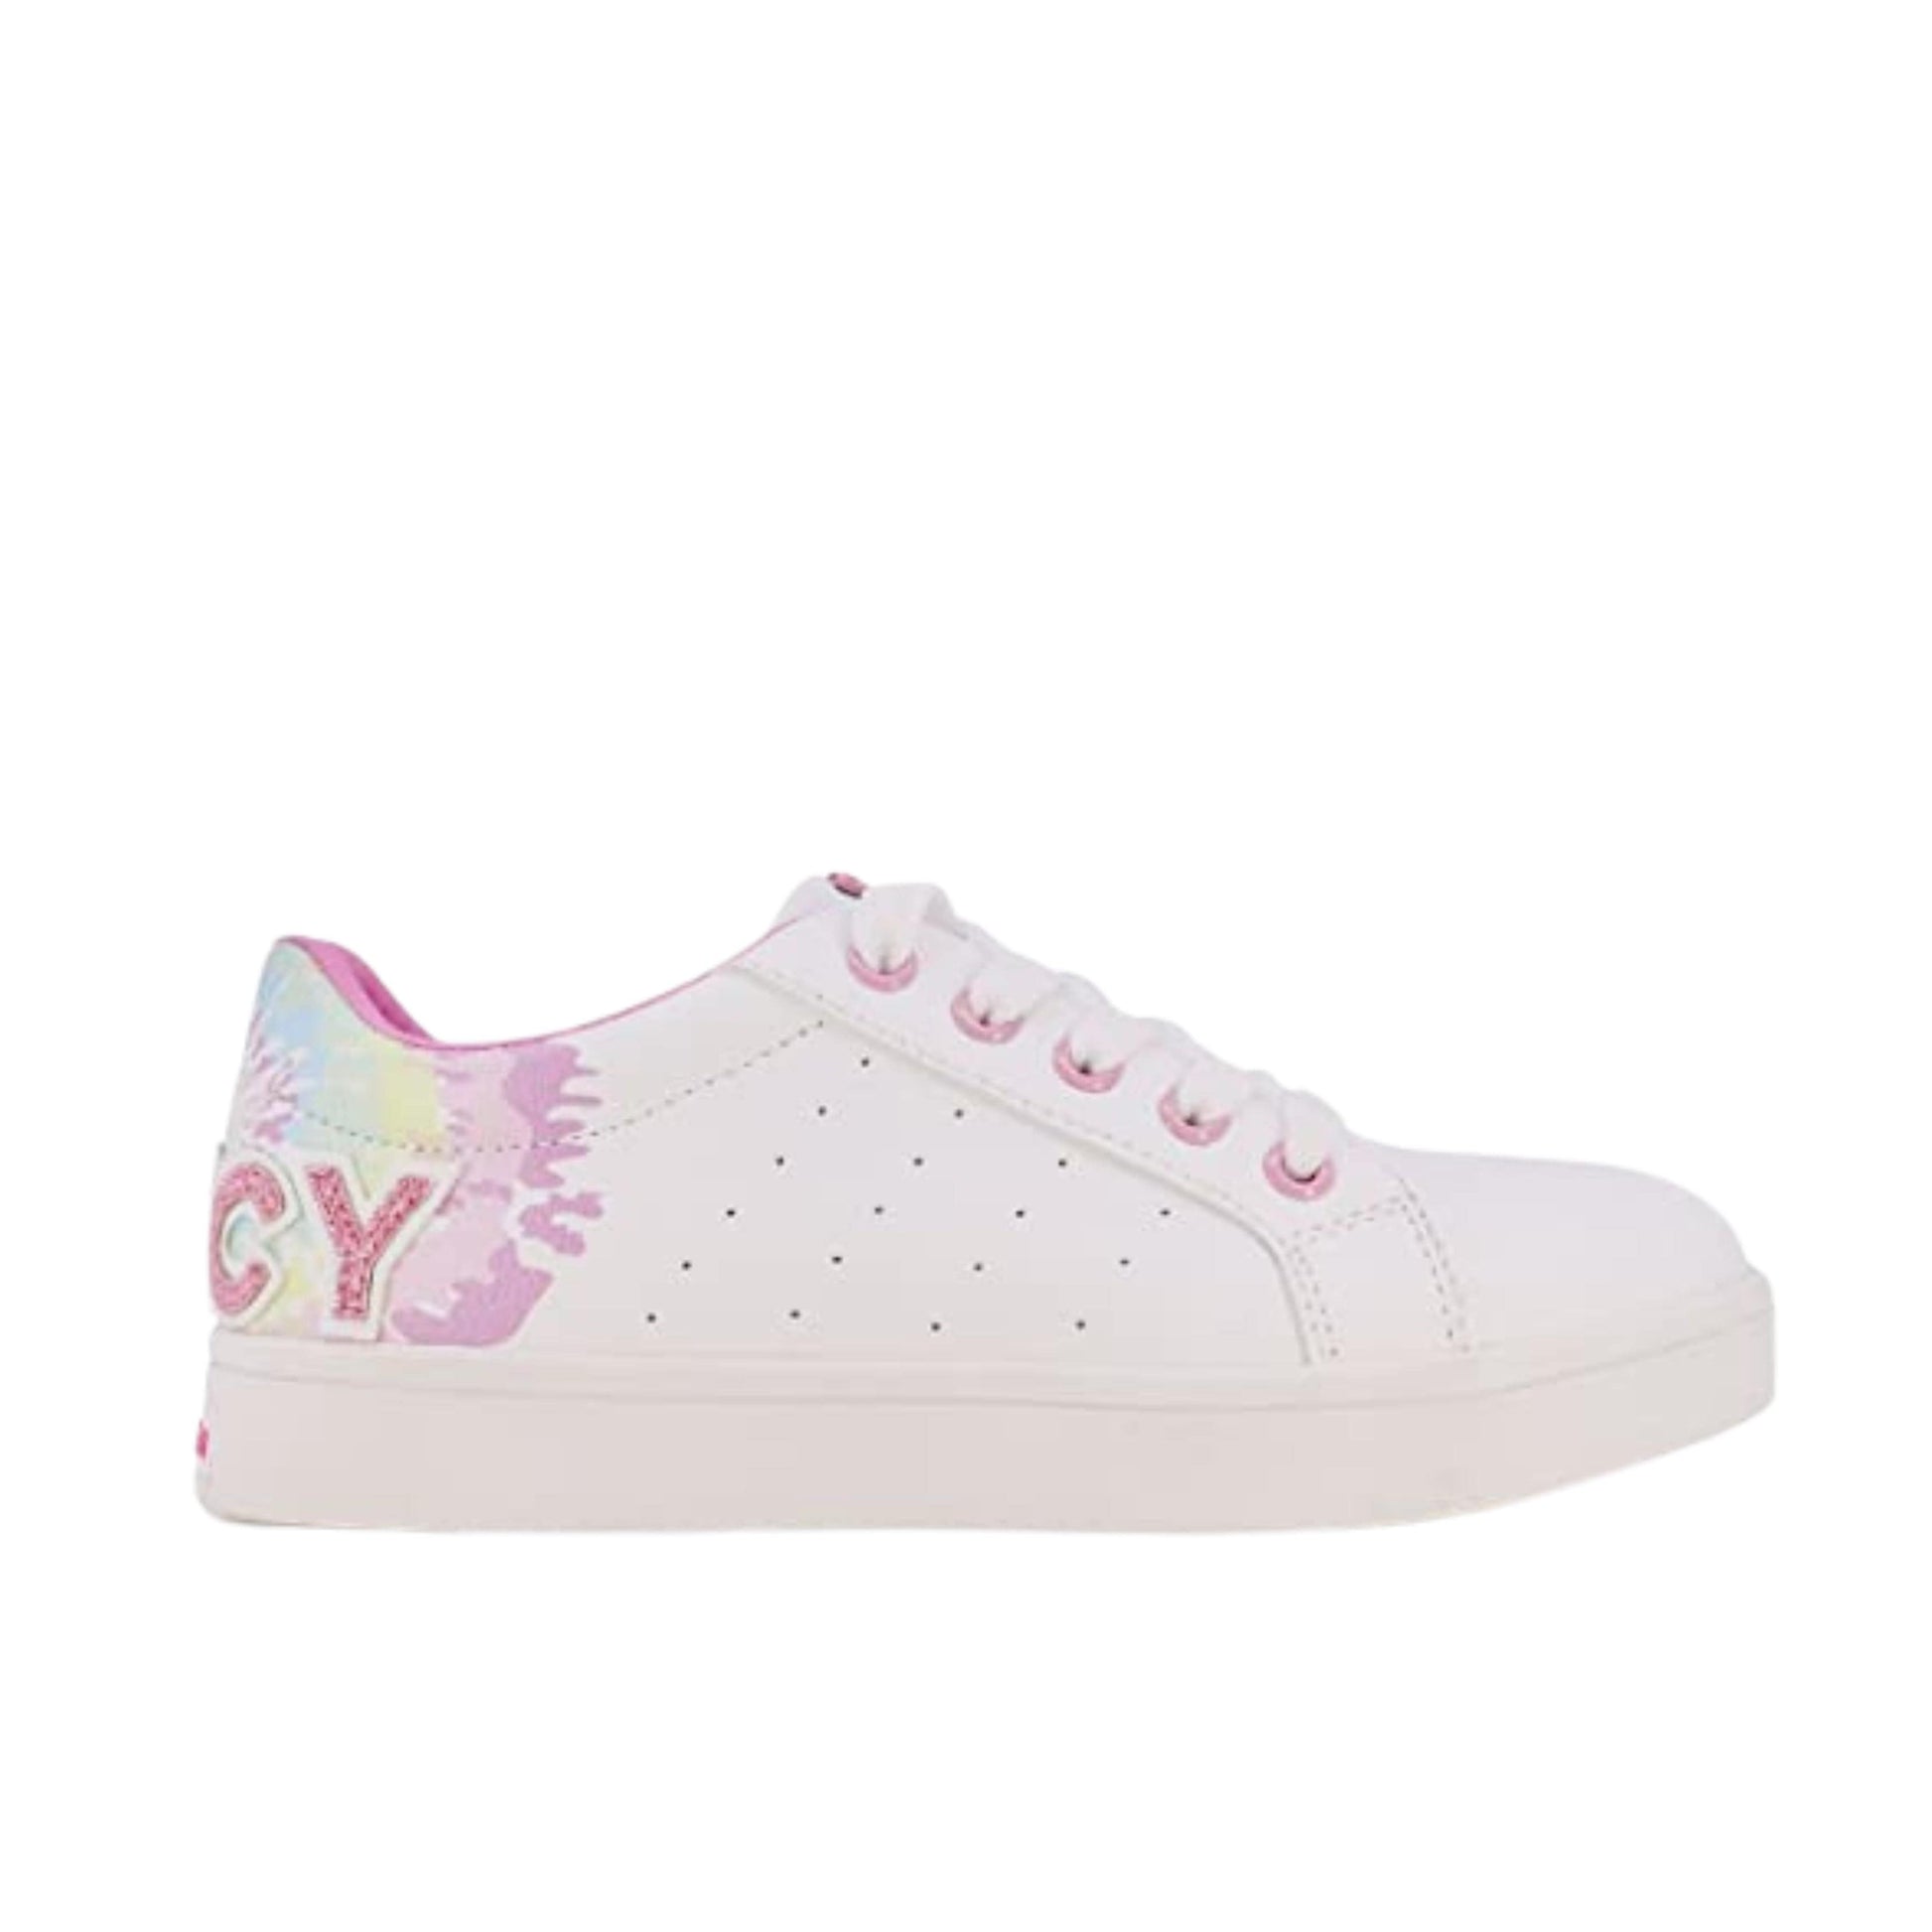 JUICY COUTURE Kids Shoes 36 / White JUICY COUTURE -Kids -  FashionLow-Top Lace up Sneaker